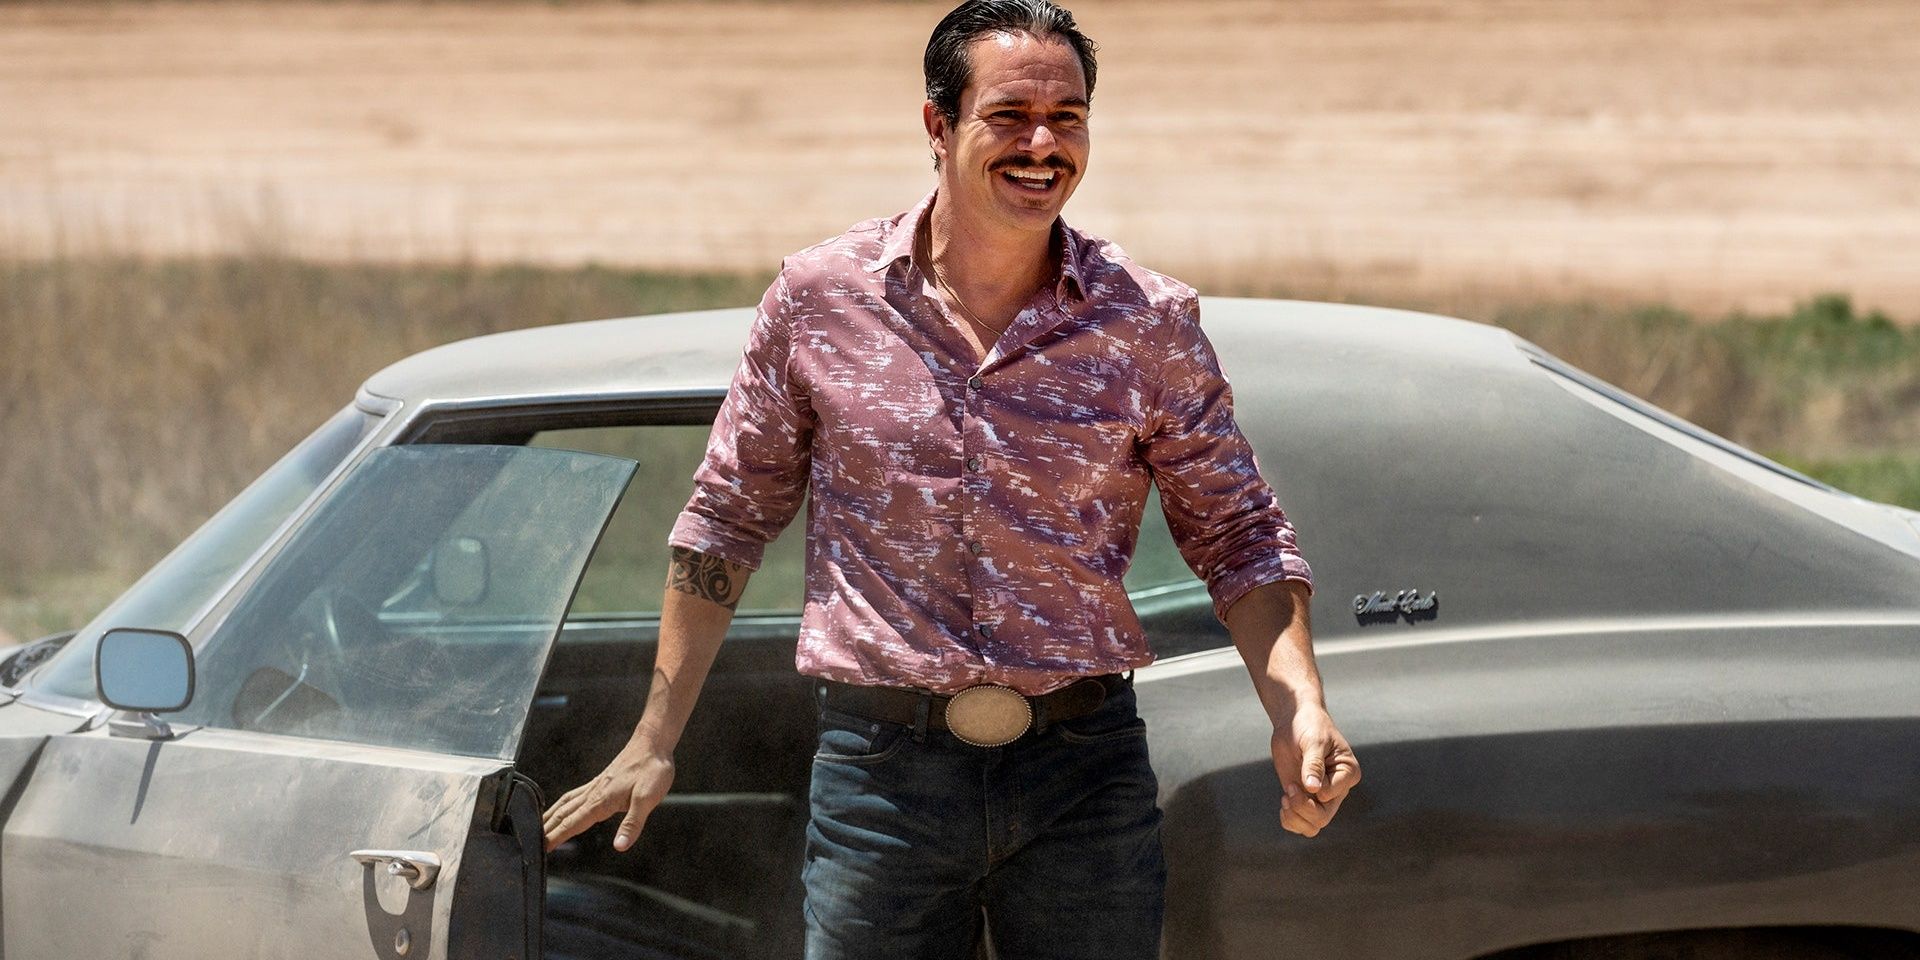 Lalo exiting his car in Better Call Saul